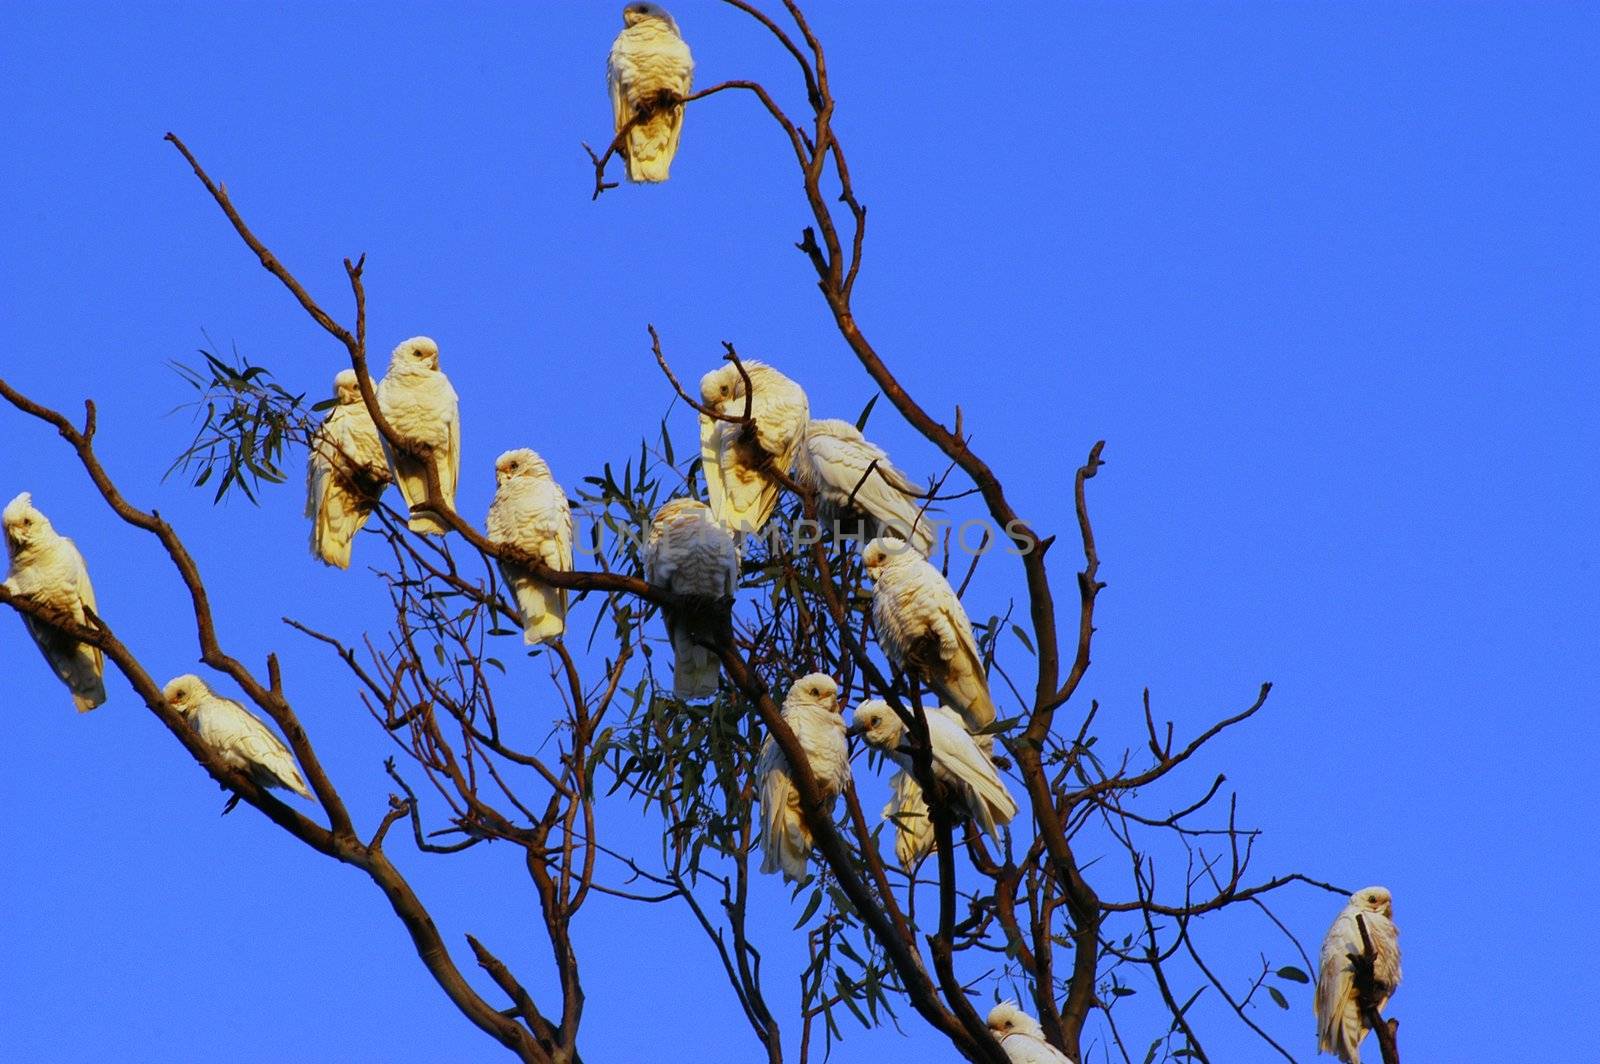 parrots on a tree in Australia by gillespaire